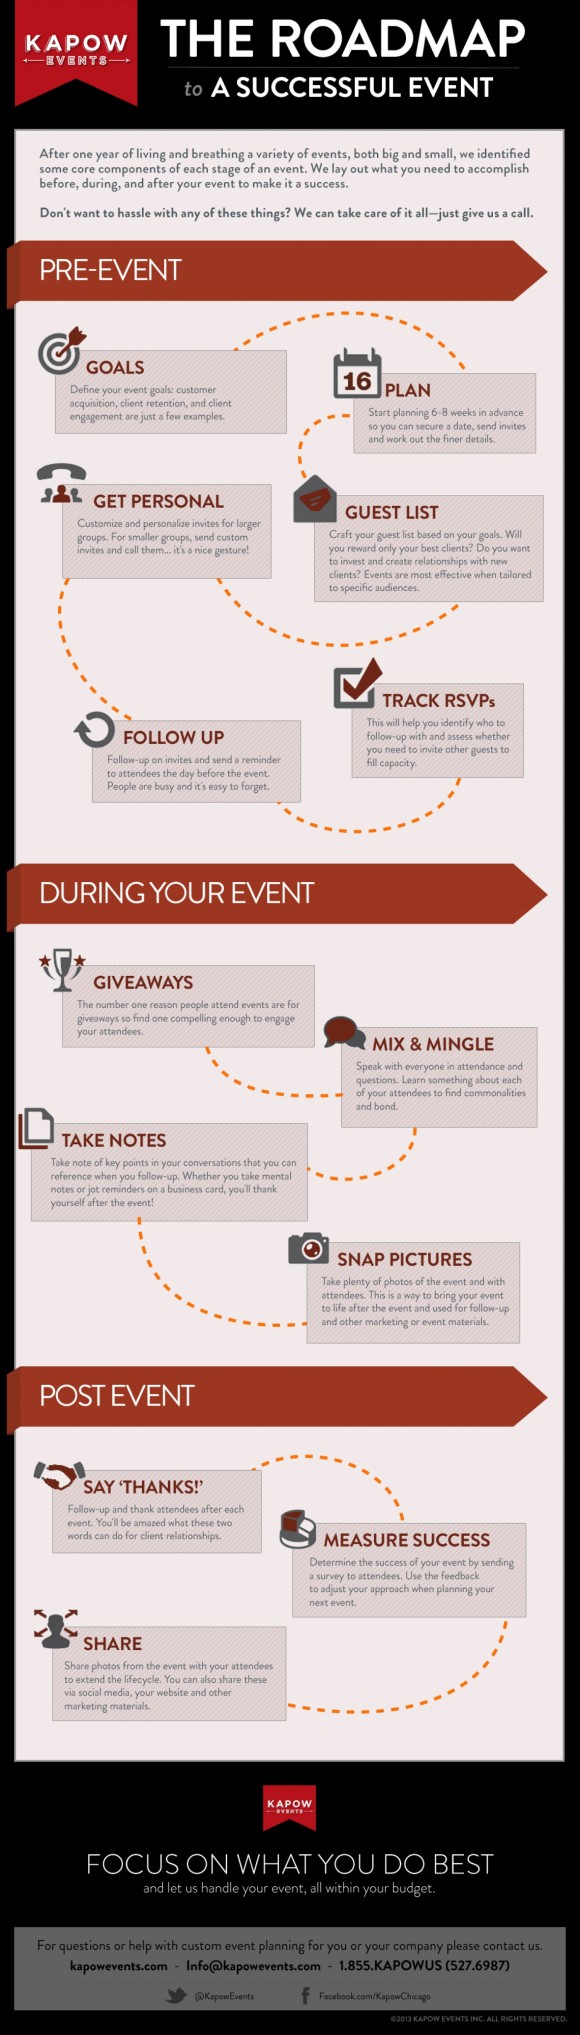 the-roadmap-to-a-successful-event_5196ceae48b49_w1500-png